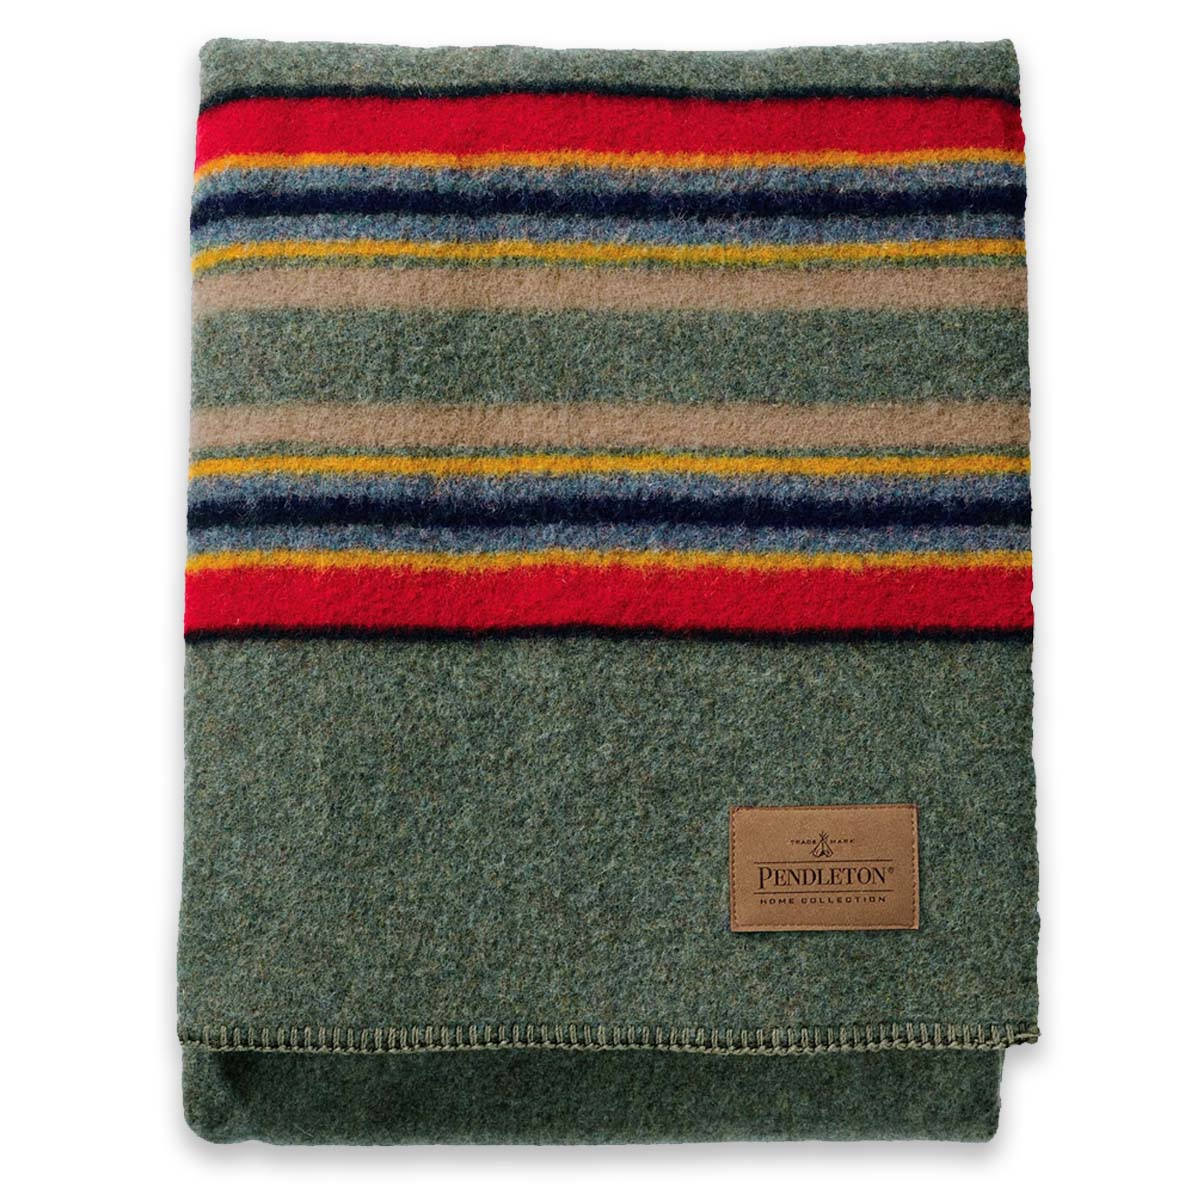 Pendleton Yakima Camp Blanket Throw Green Heather, perfectly sized for the sofa, chair or foot of the bed